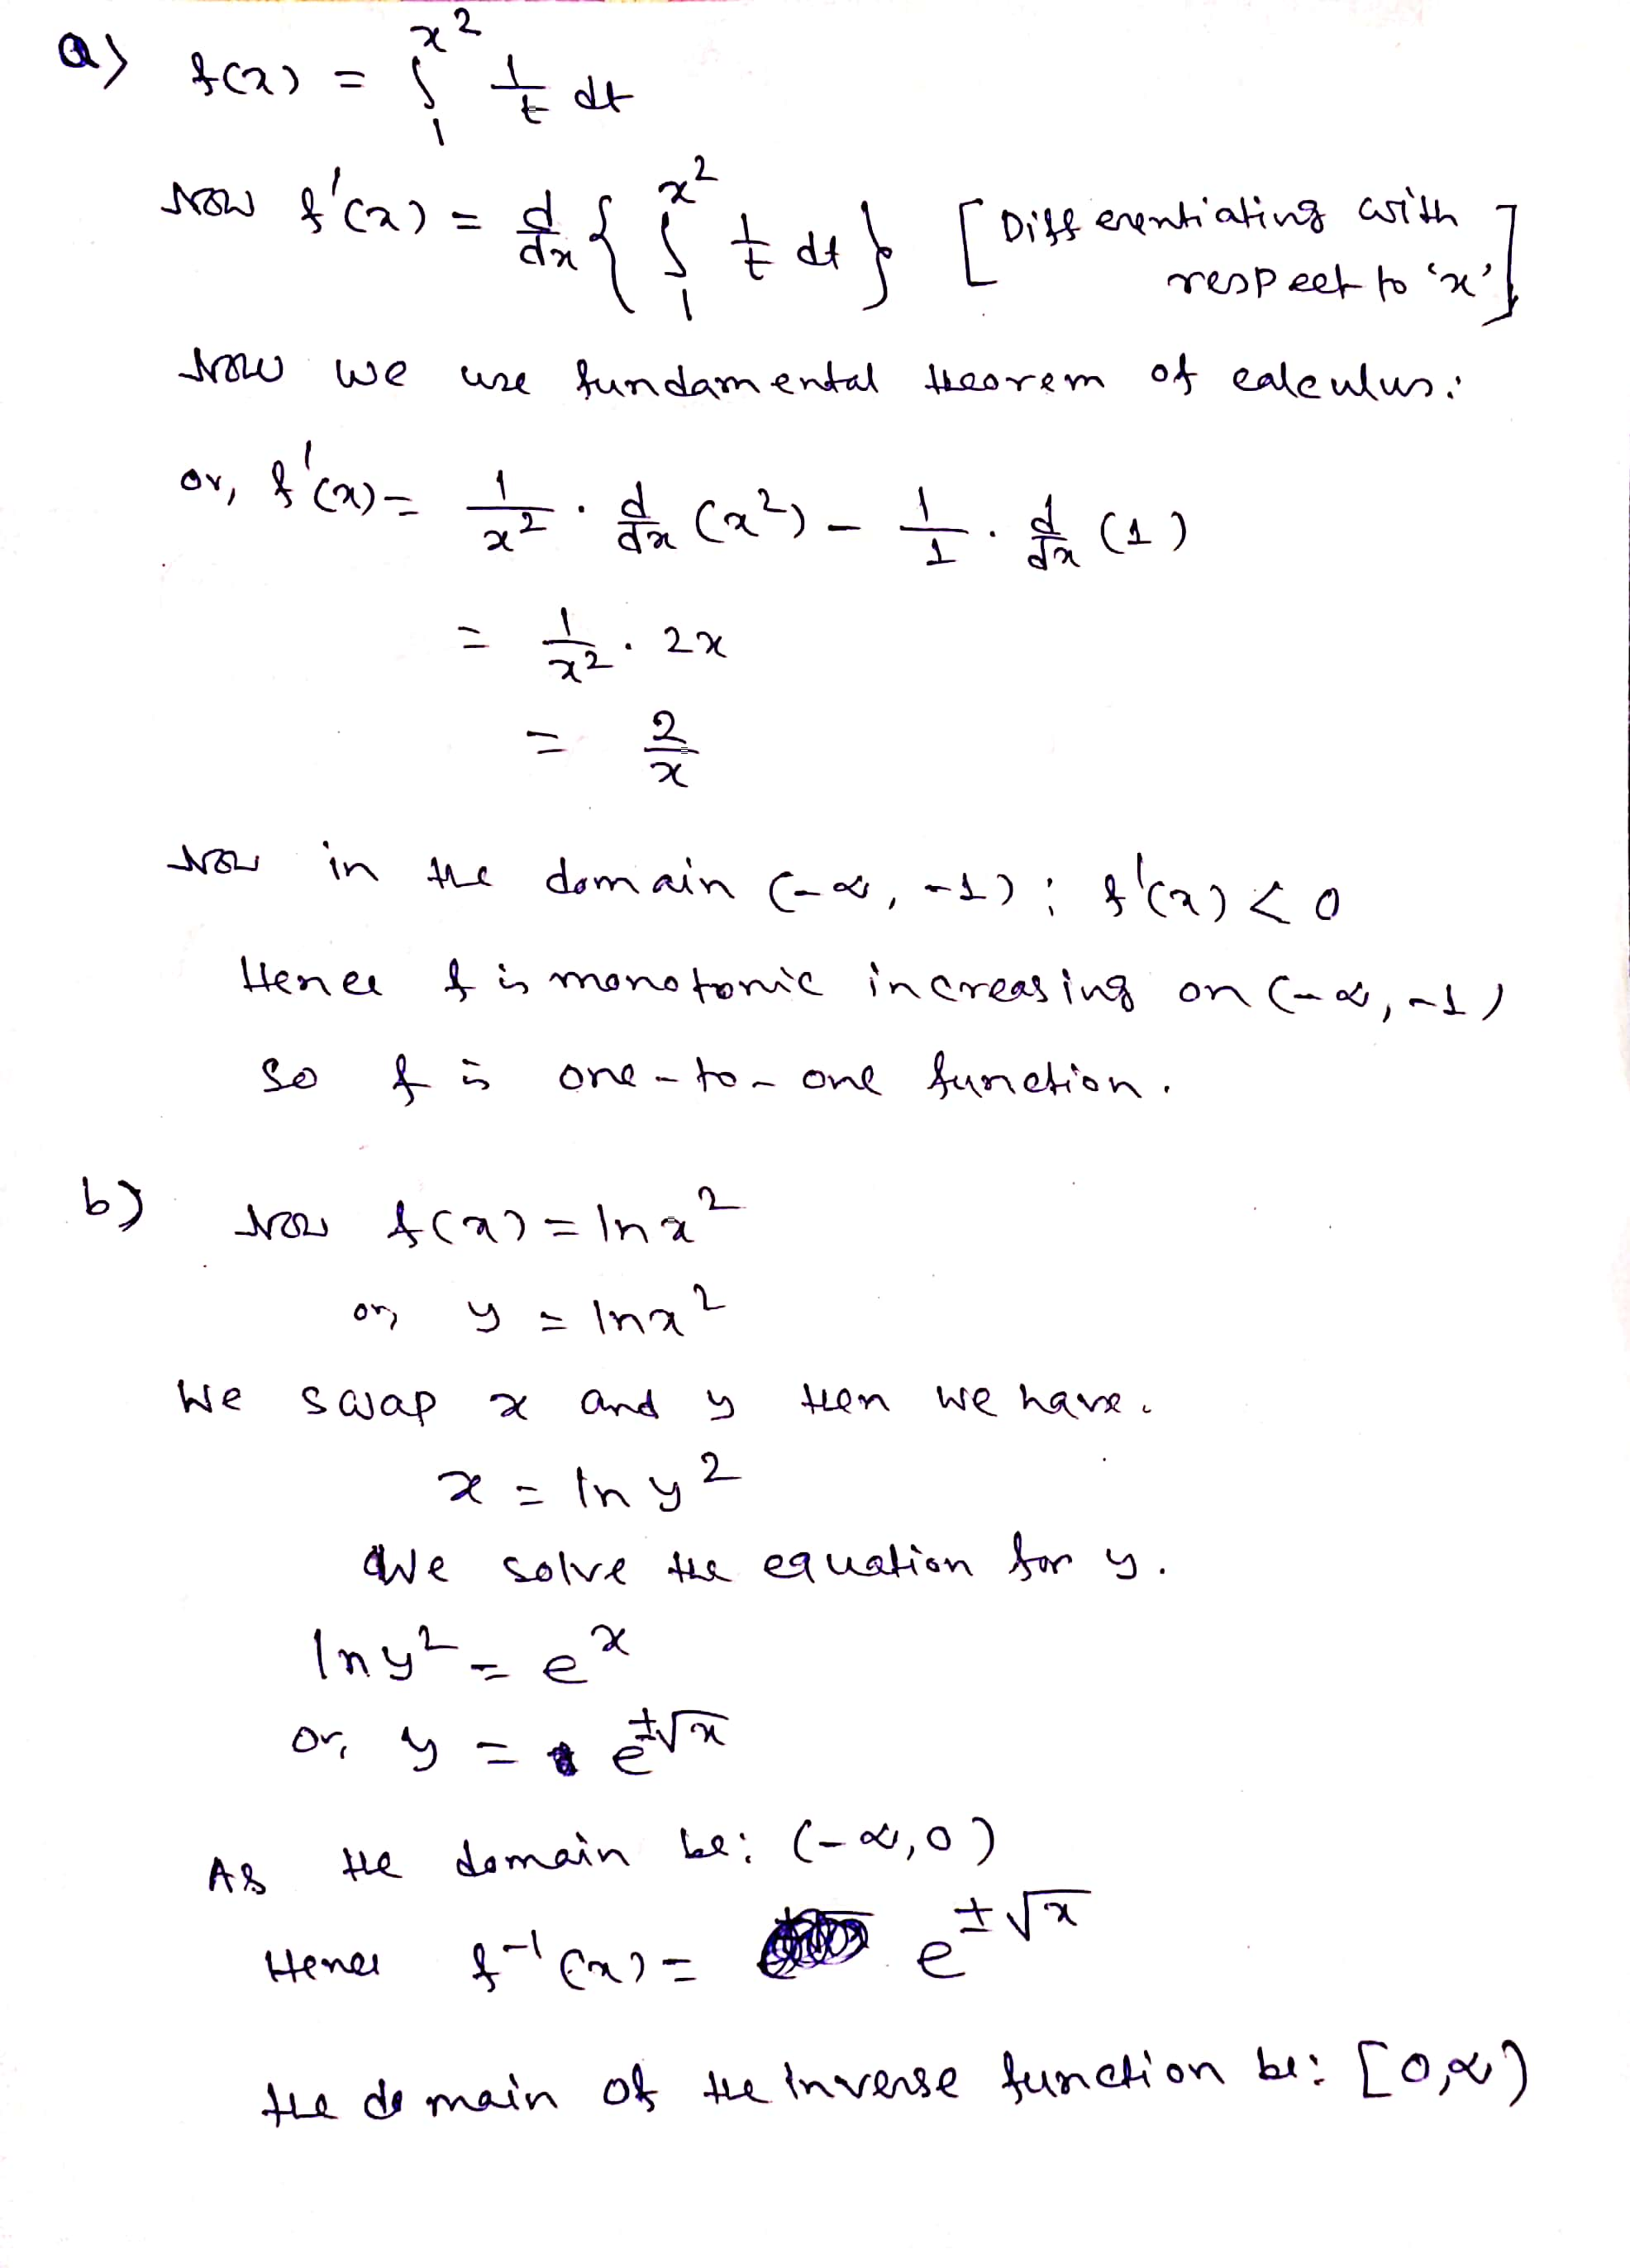 Let f be the function defined on (-1,-1)by S(x)=1;a. dt. Determine whether is a one-to-one function on (-0, -1). (8 marks) (b) Determine the inverse of the function S(x)= ln x' for x in (-0,0). Justify your answer. State the domain of the inverse. (8 mark 7qQRtO